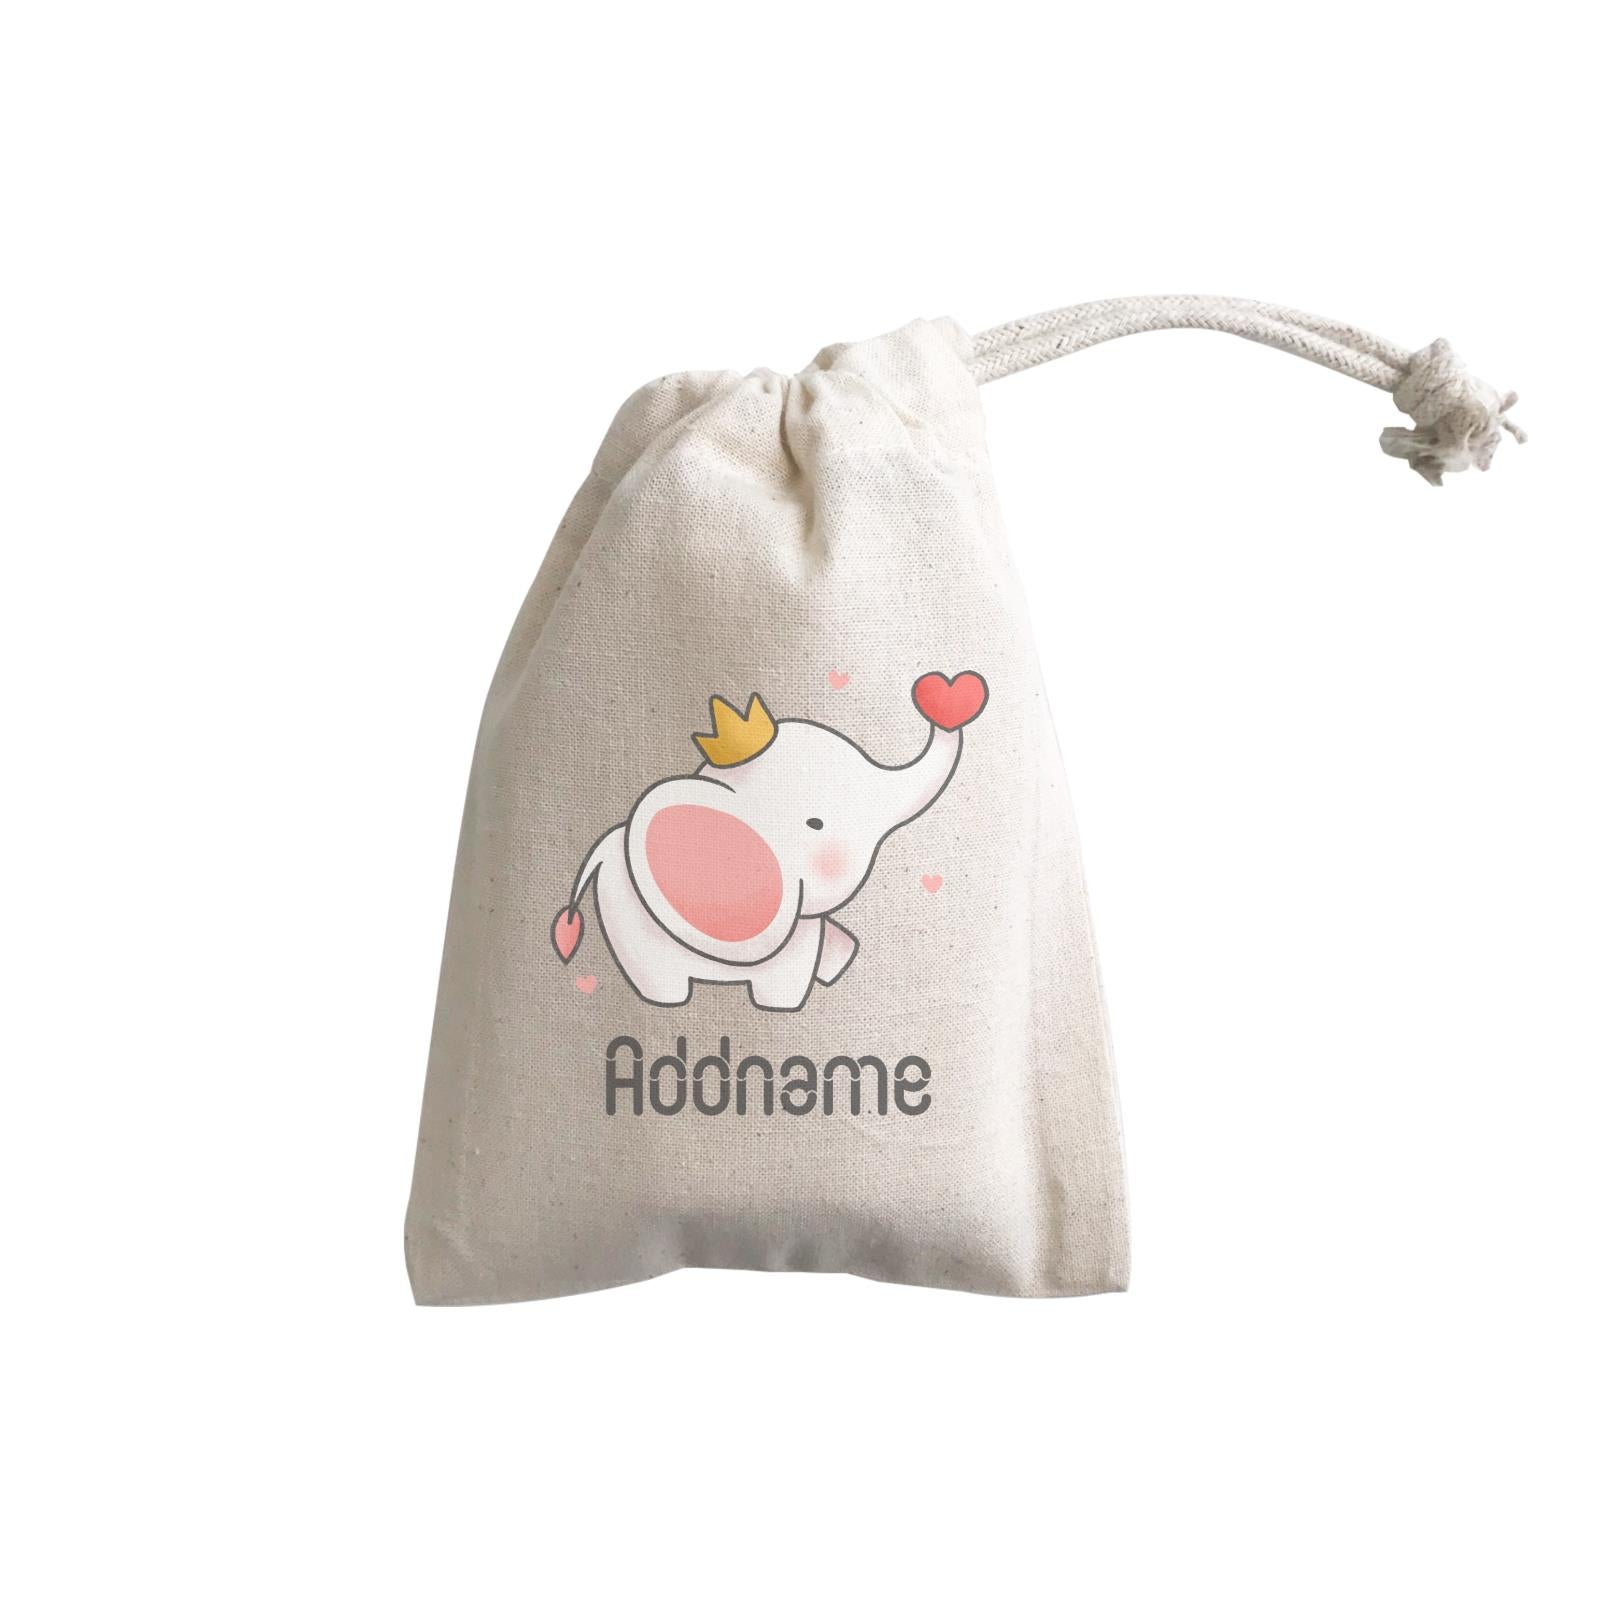 Cute Hand Drawn Style Baby Elephant with Heart and Crown Addname GP Gift Pouch